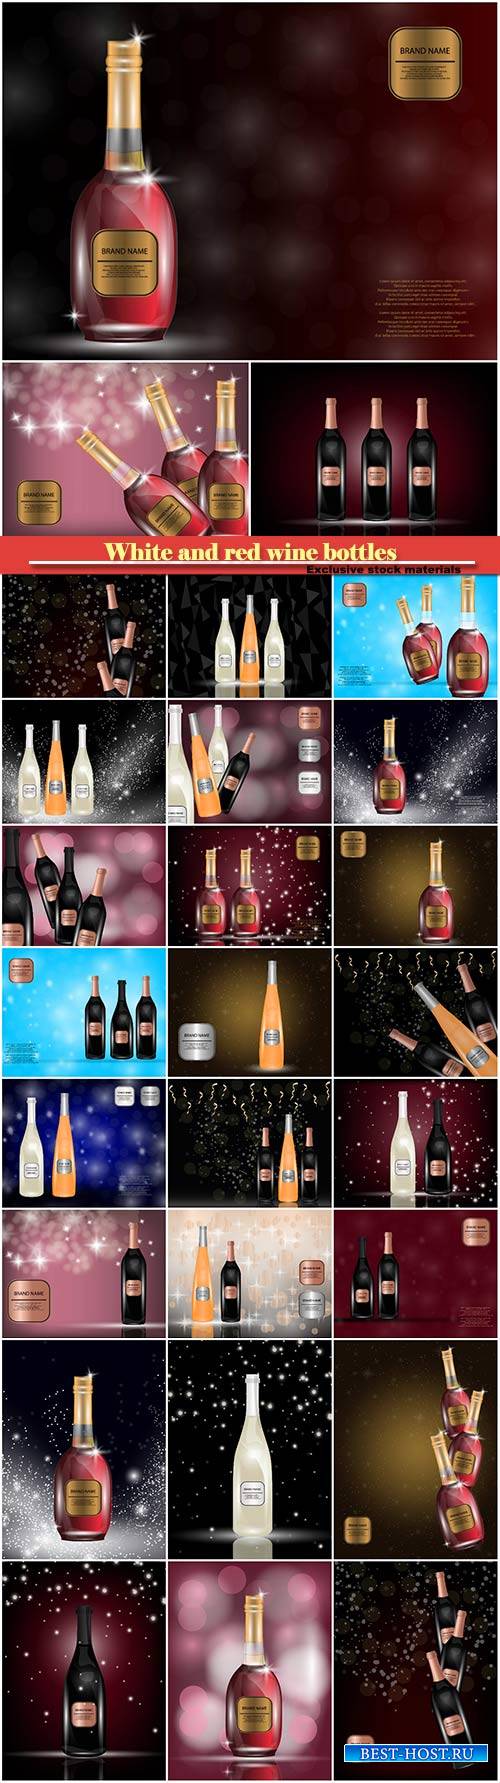 White and red wine bottles on the sparkling vector background